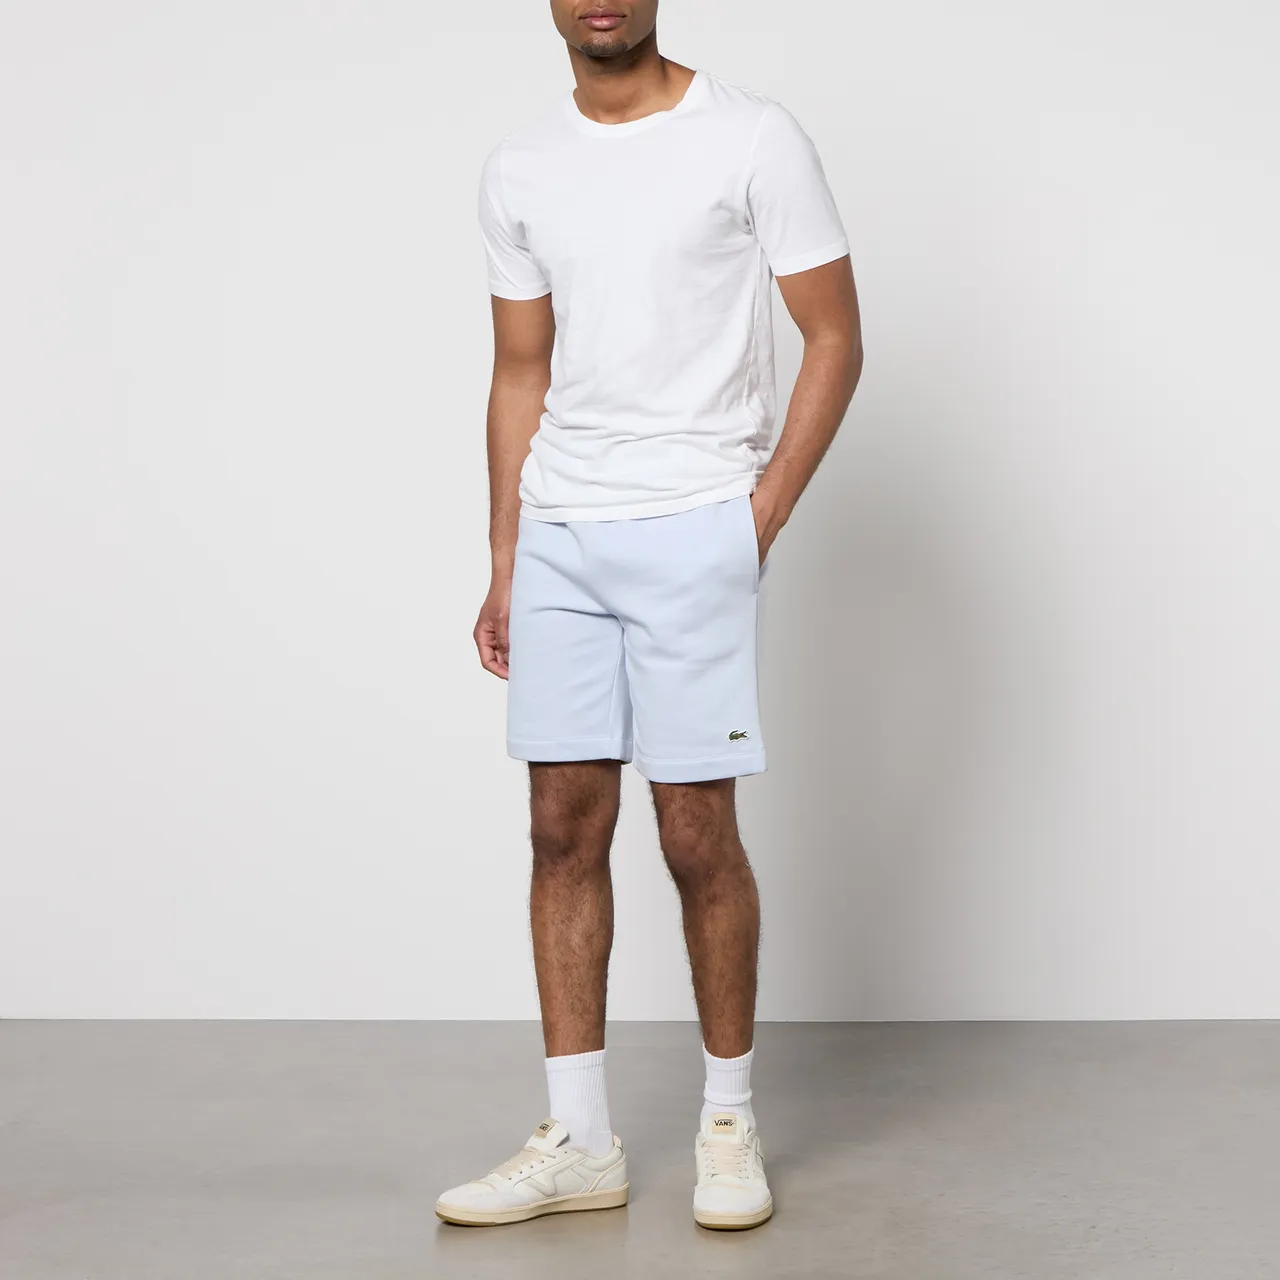 Lacoste Casual Cotton-Blend Jersey Shorts